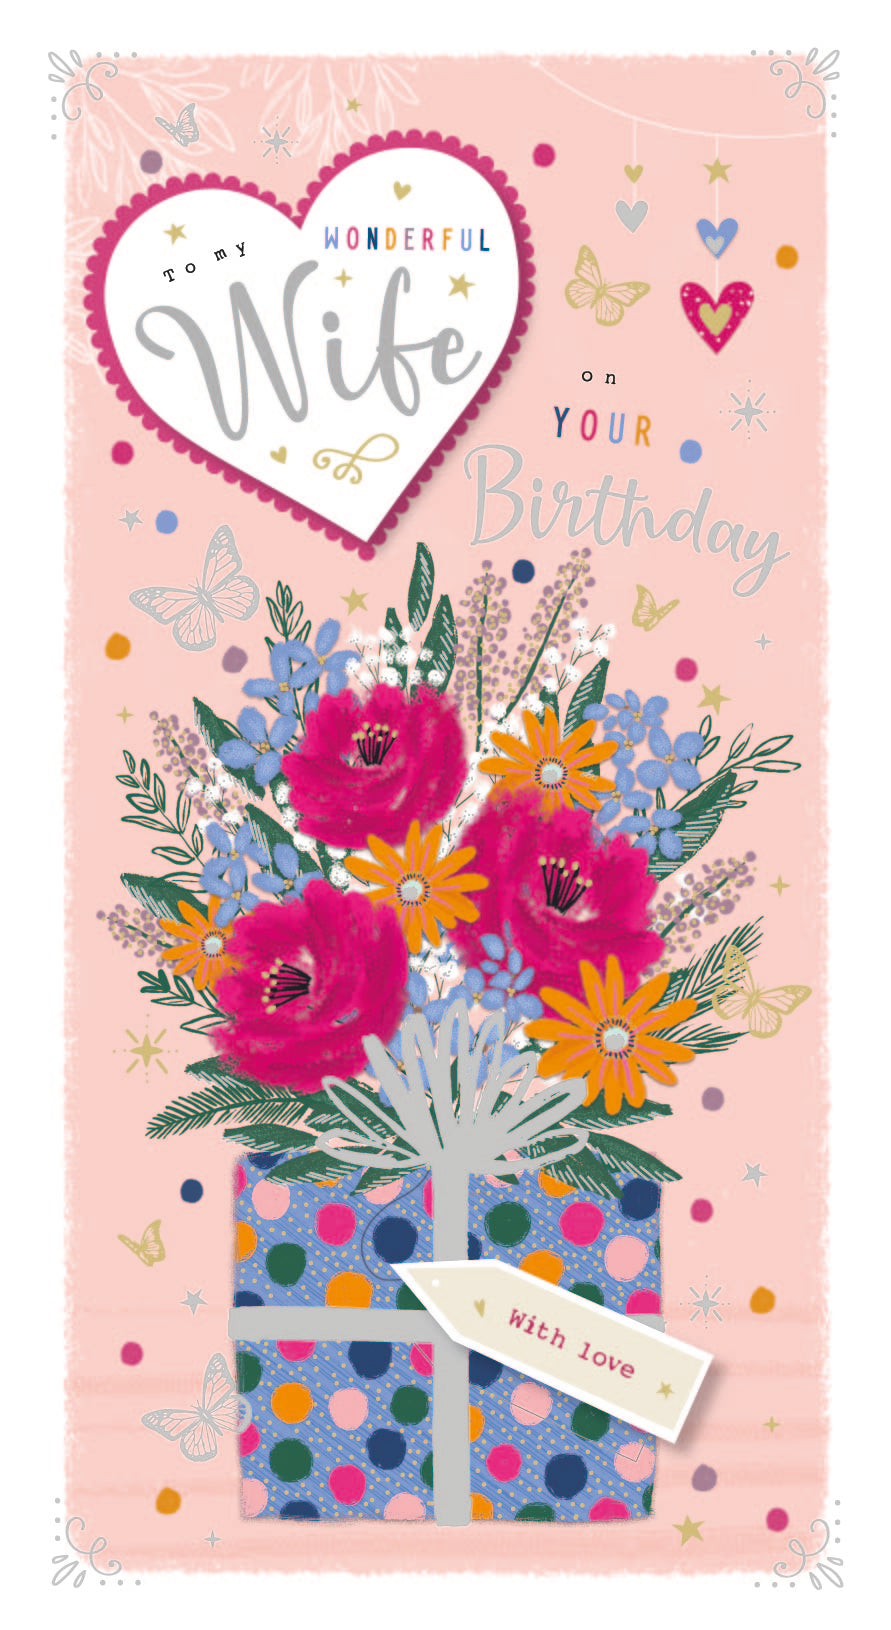 Wife birthday card - flowers and hearts